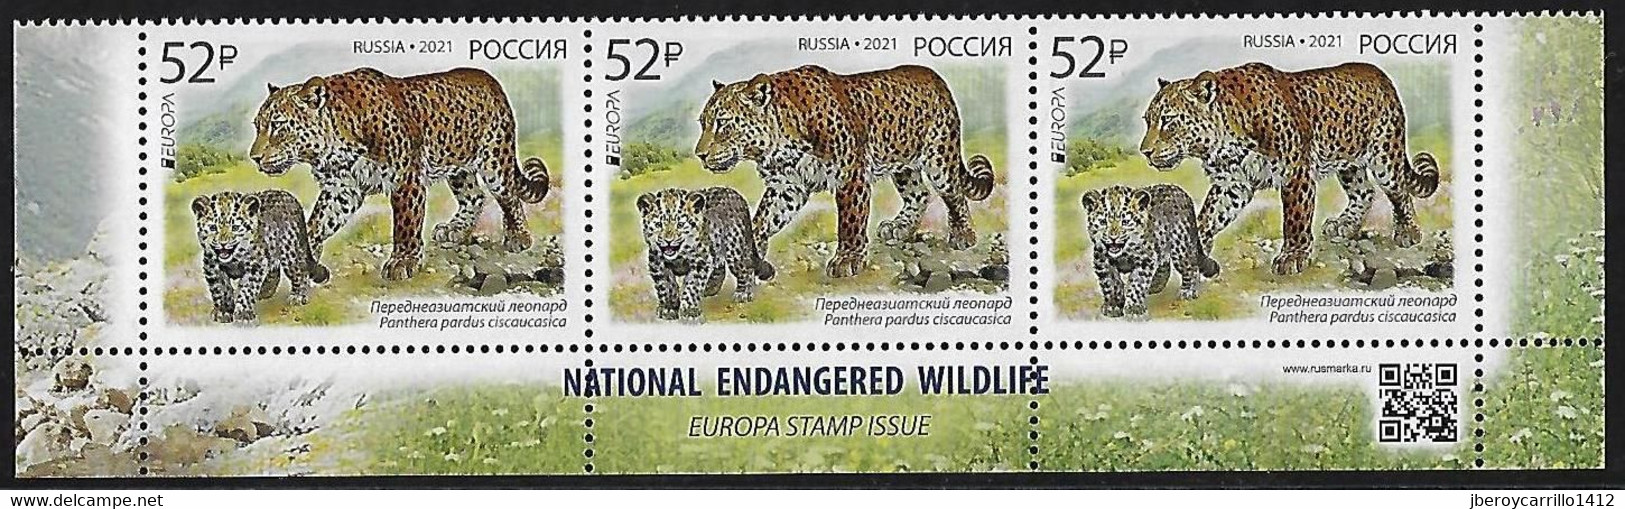 RUSIA 2021 /RUSSLAND /RUSSIA - EUROPA 2021 -"NATIONAL ENDANGERED WILDLIFE"- LEOPARD (PANTHERA).- STRIP Of 3 STAMPS - INF - 2021